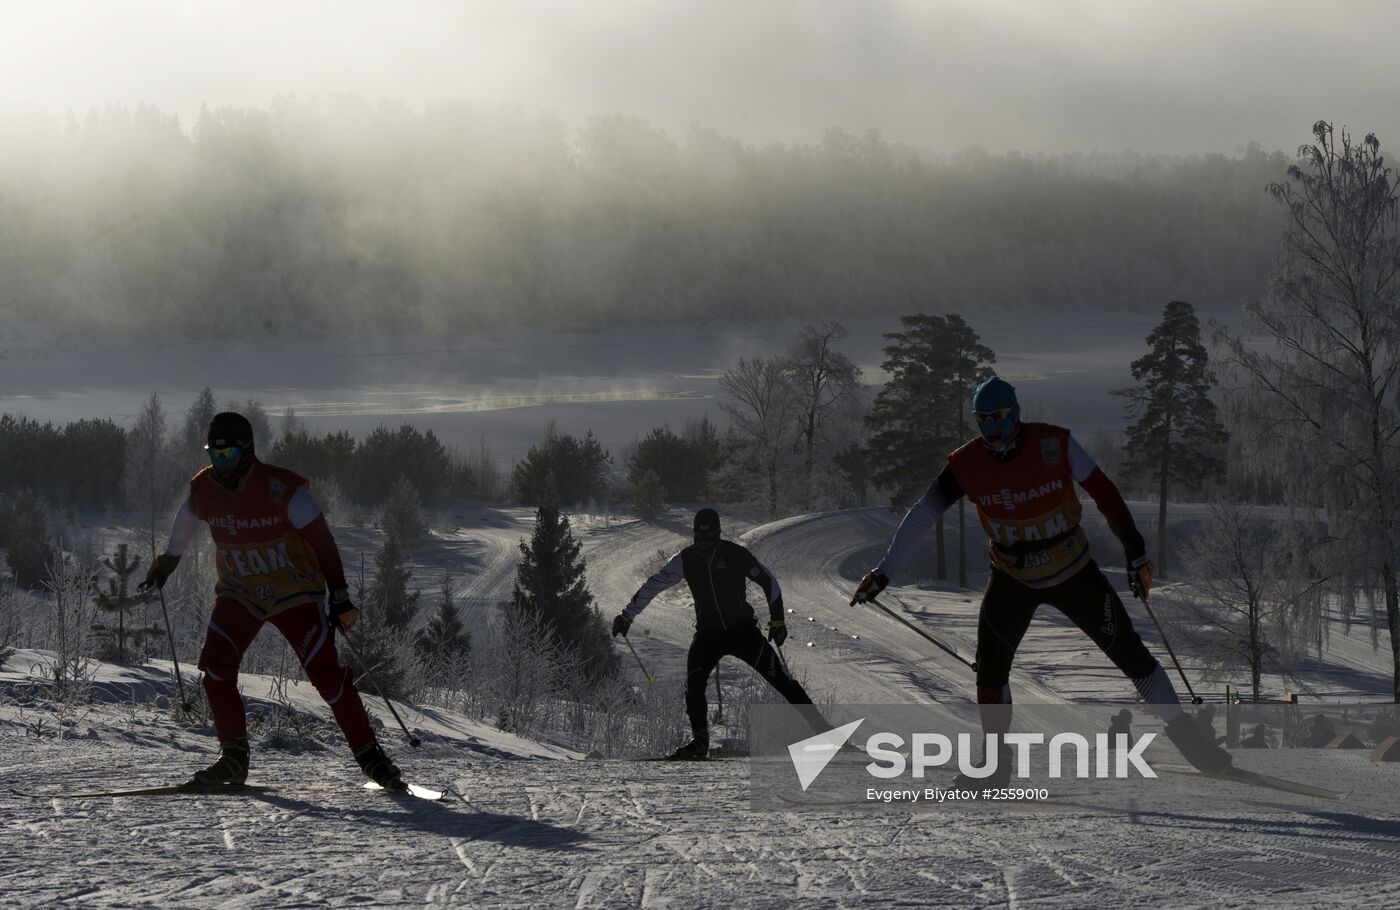 World Cup Ski Competitions. 10th Stage. Trianing Sessions.